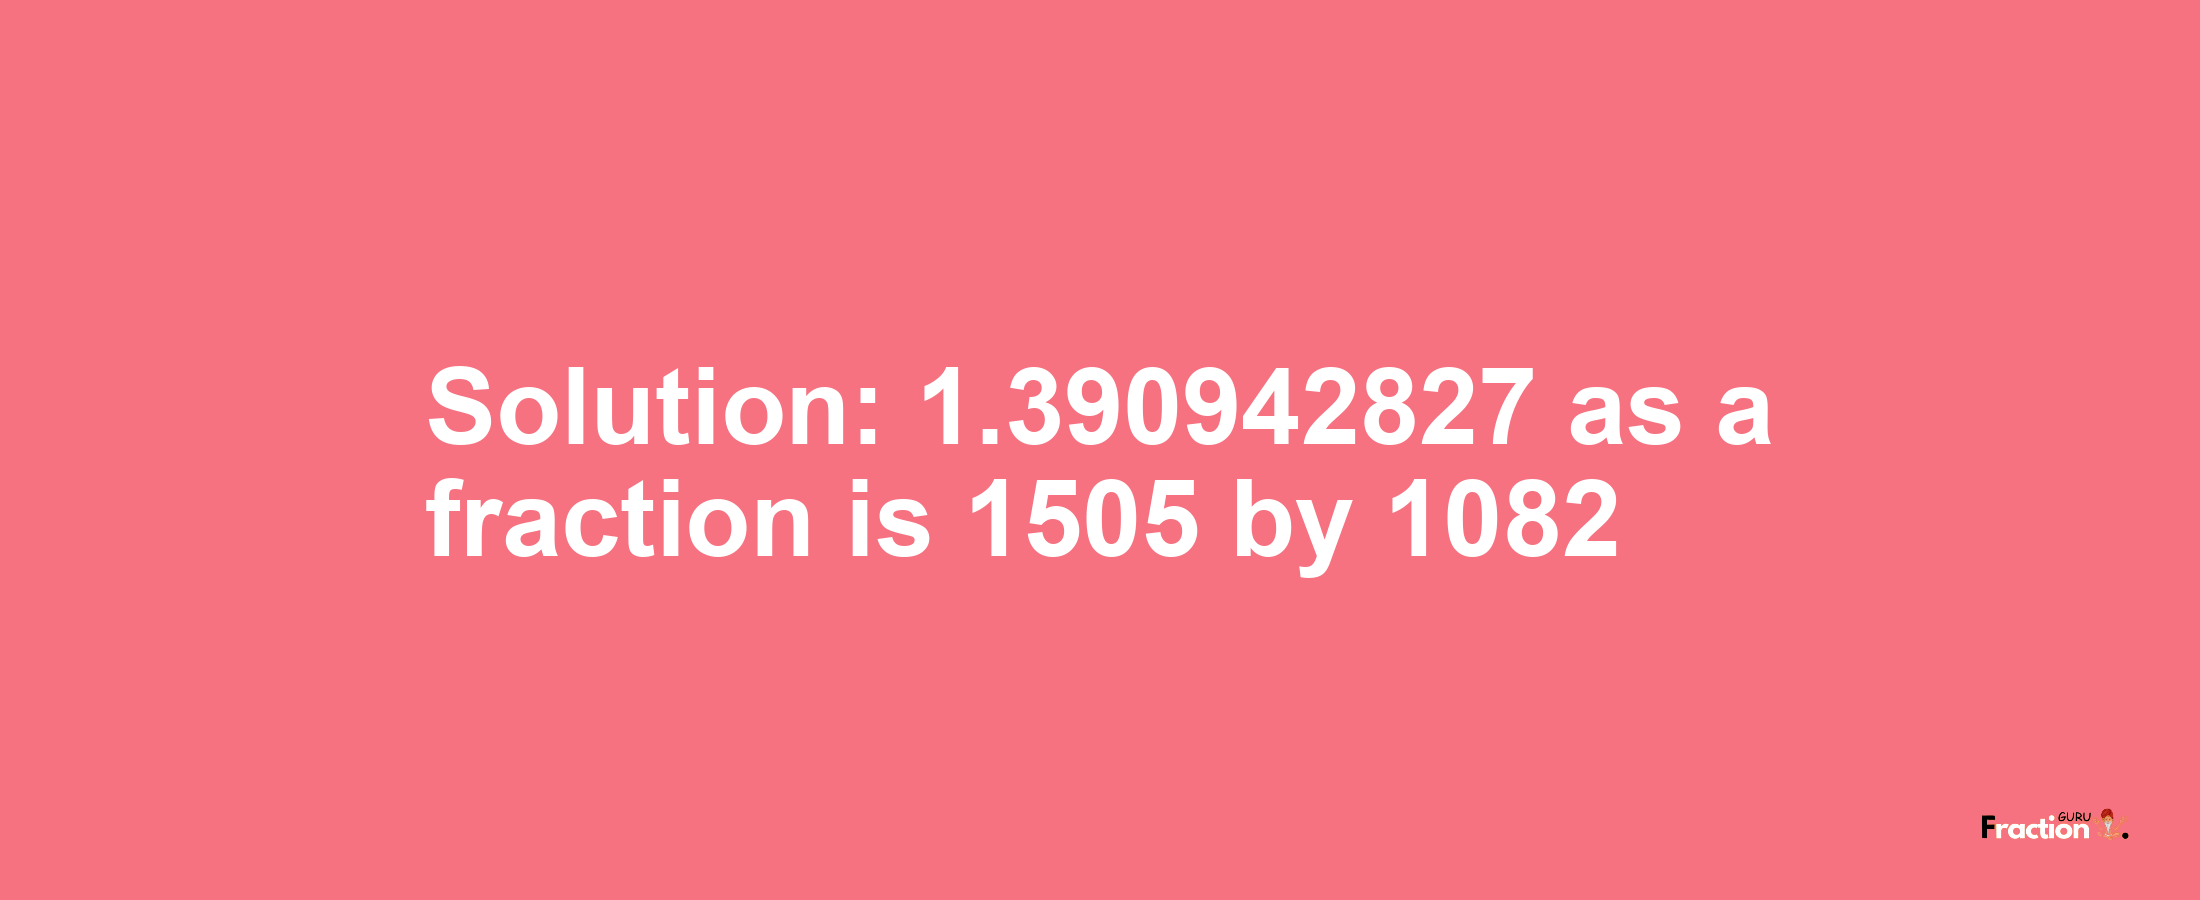 Solution:1.390942827 as a fraction is 1505/1082